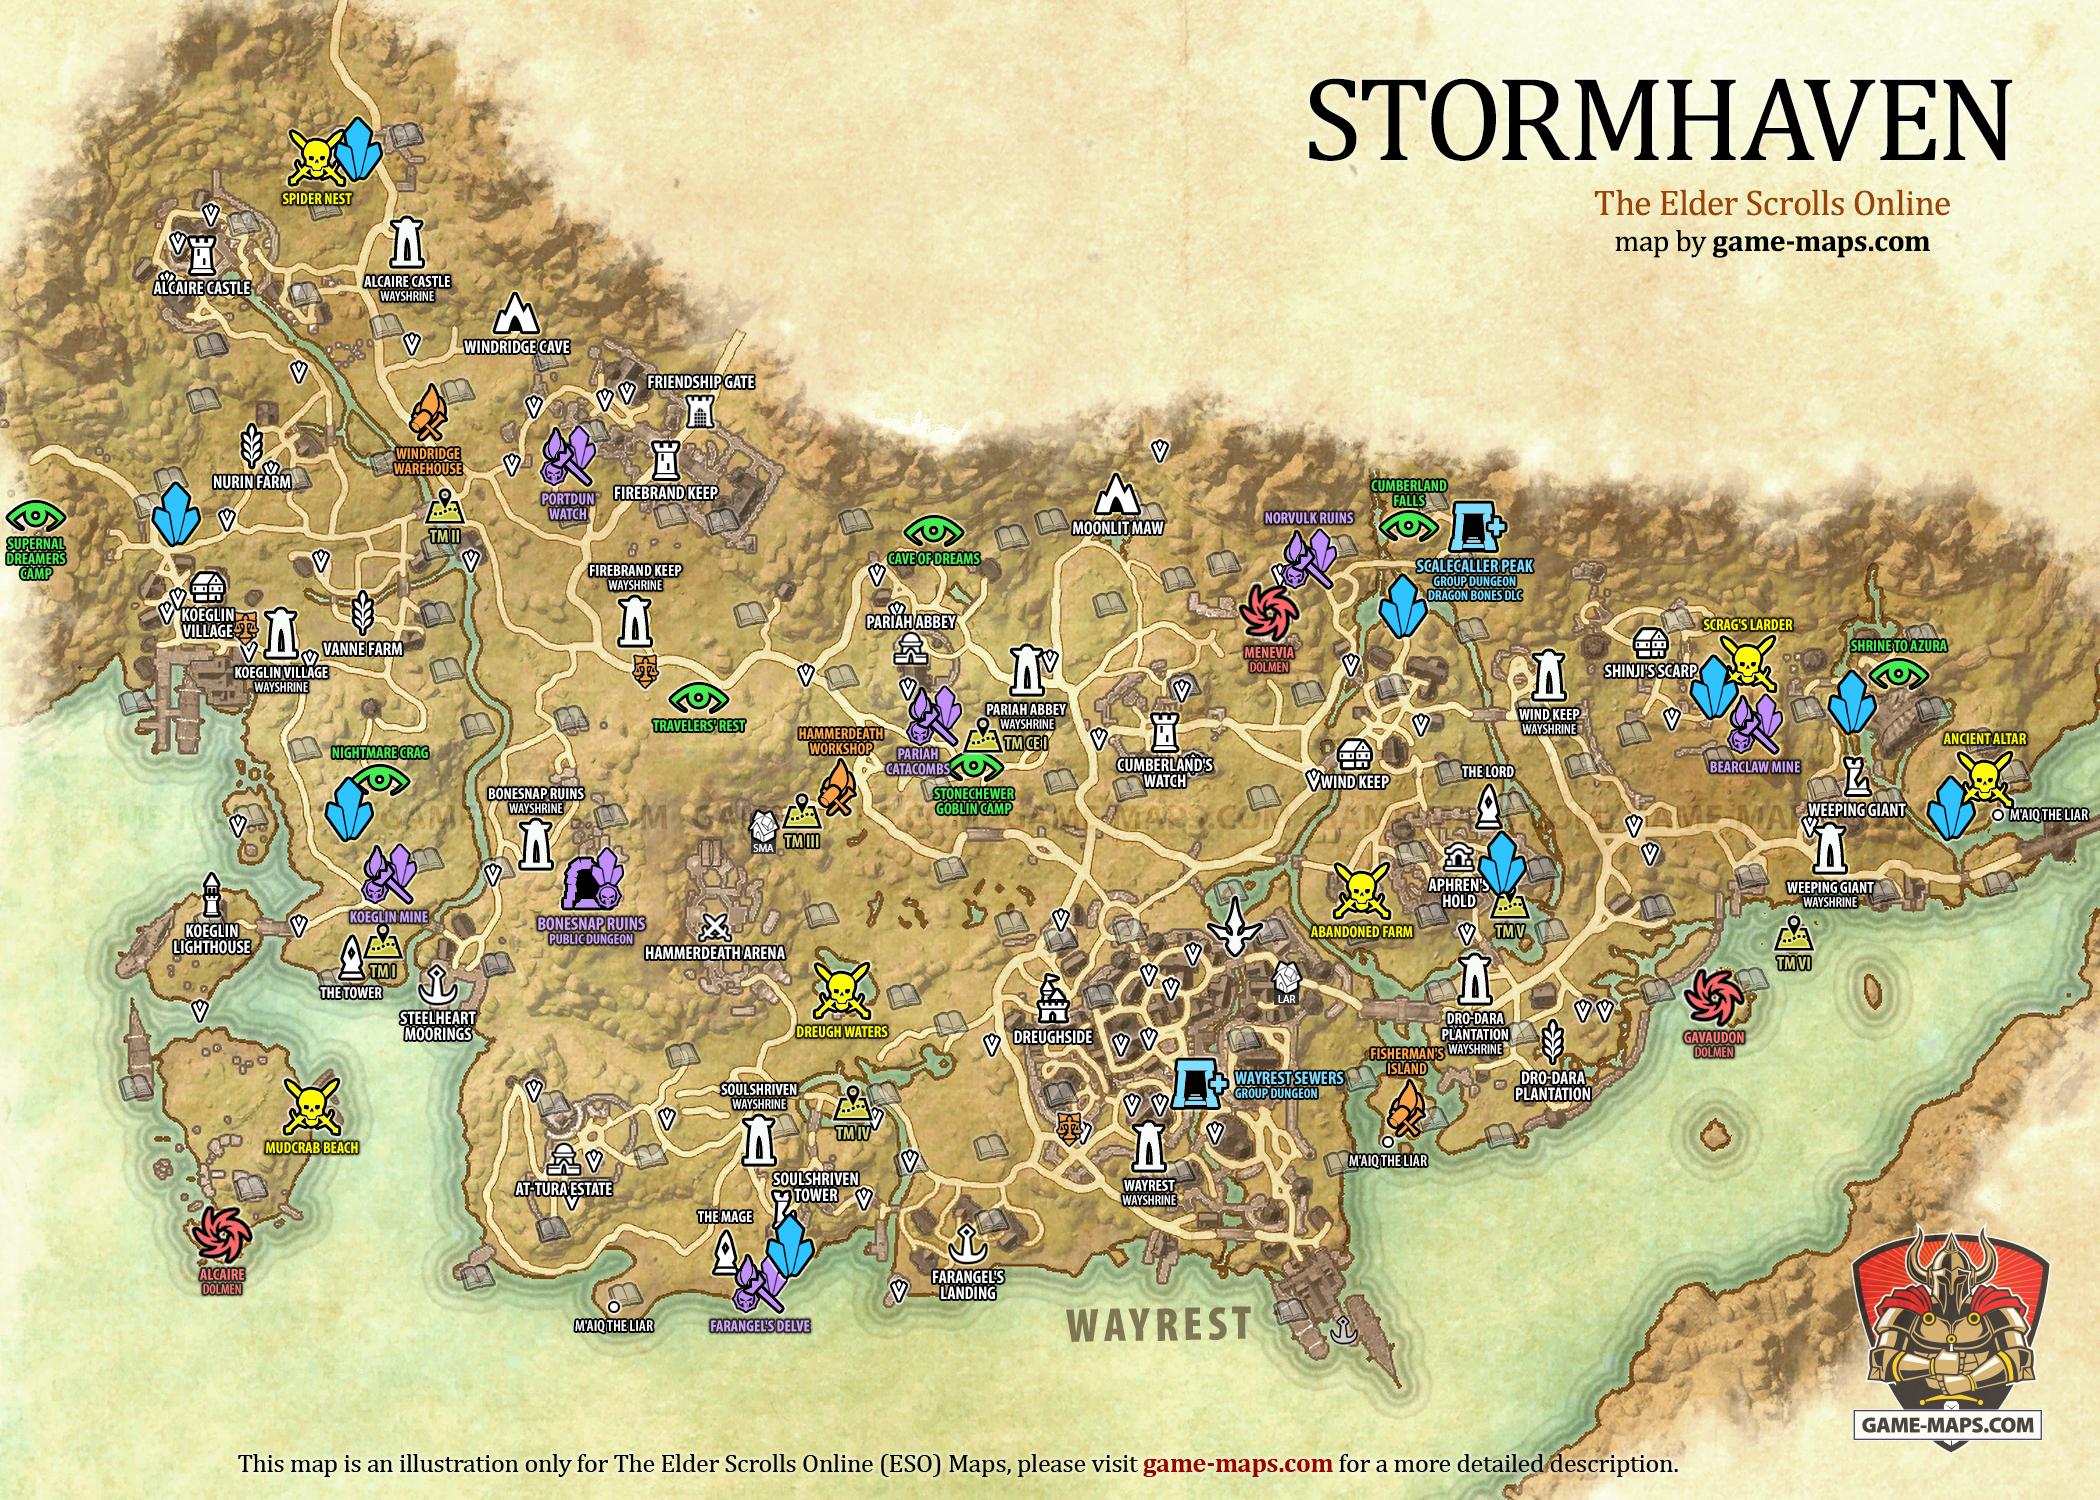 Stormhaven Map The Elder Scrolls Online Game Maps 11760 Hot Sex Picture